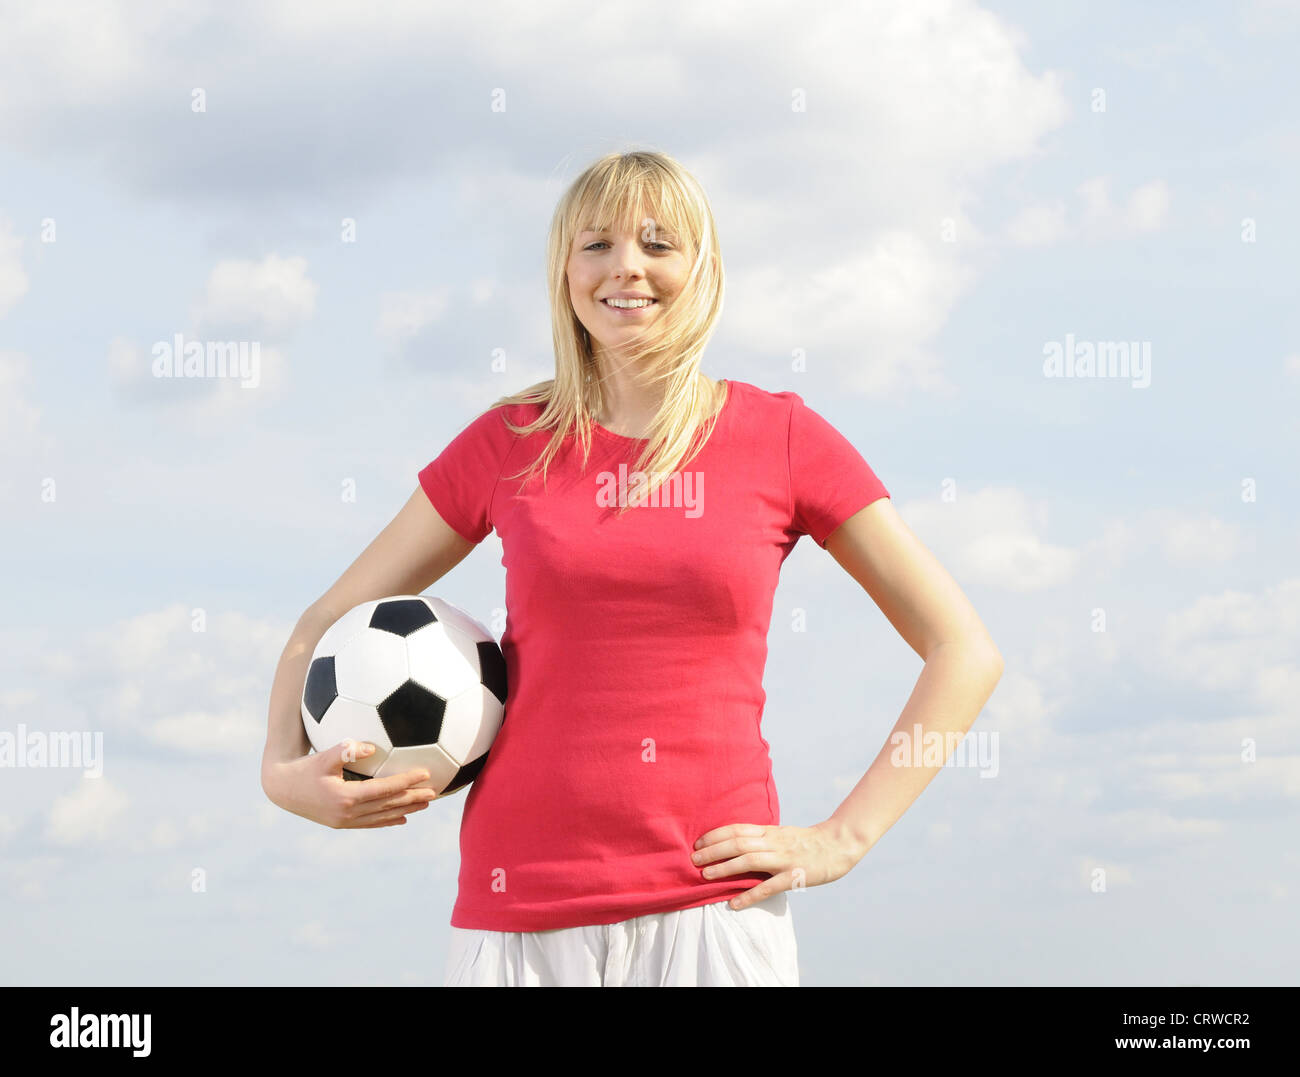 young woman with soccer ball Stock Photo